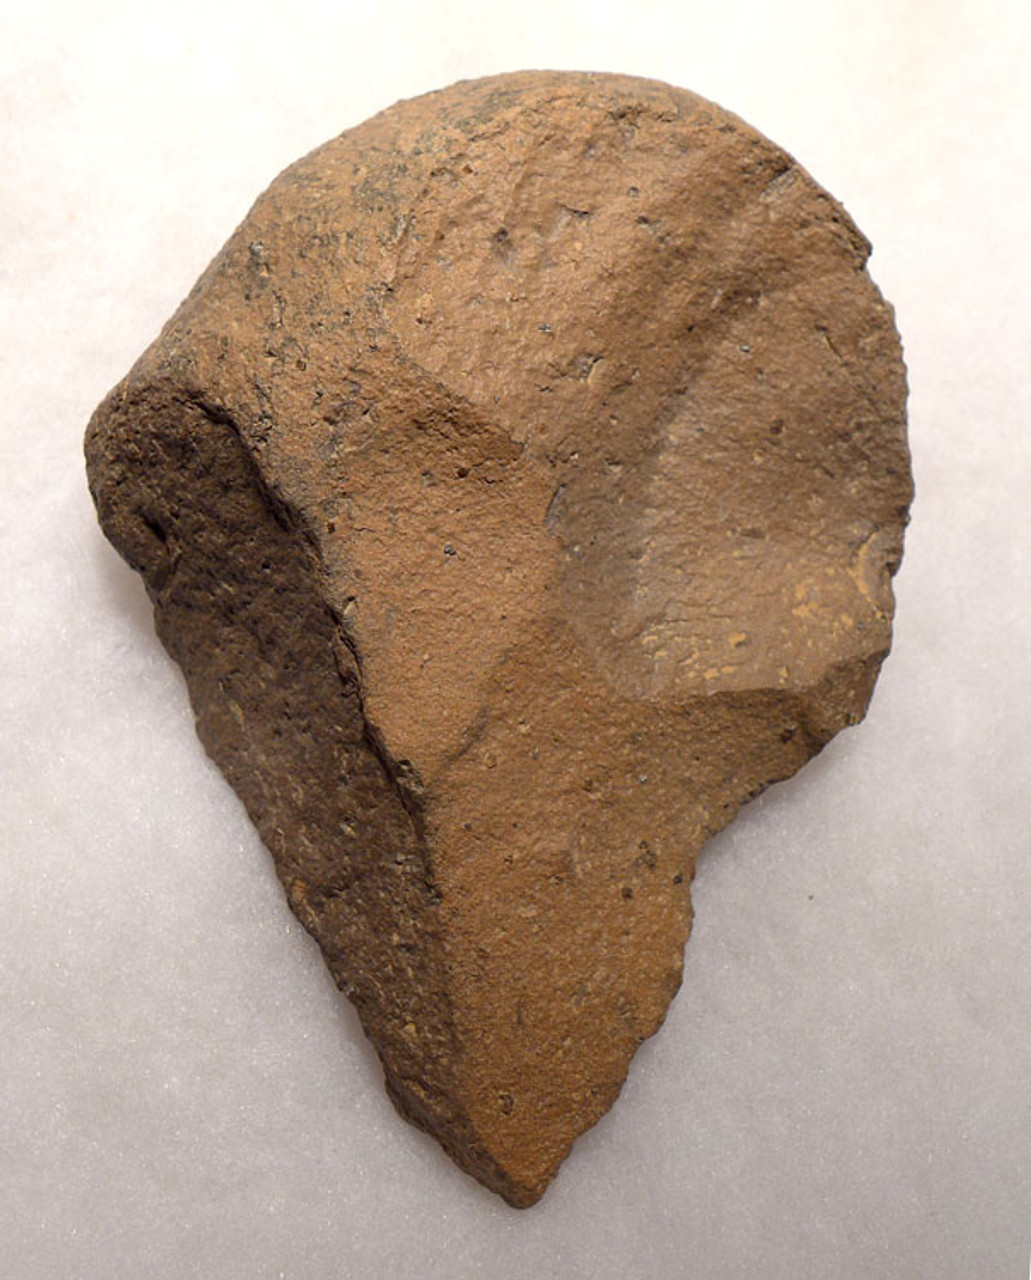 AFRICAN OLDOWAN PEBBLE PROTO AXE WITH POINTED TIP SHOWING EVOLVING TOOL DESIGN *PB125